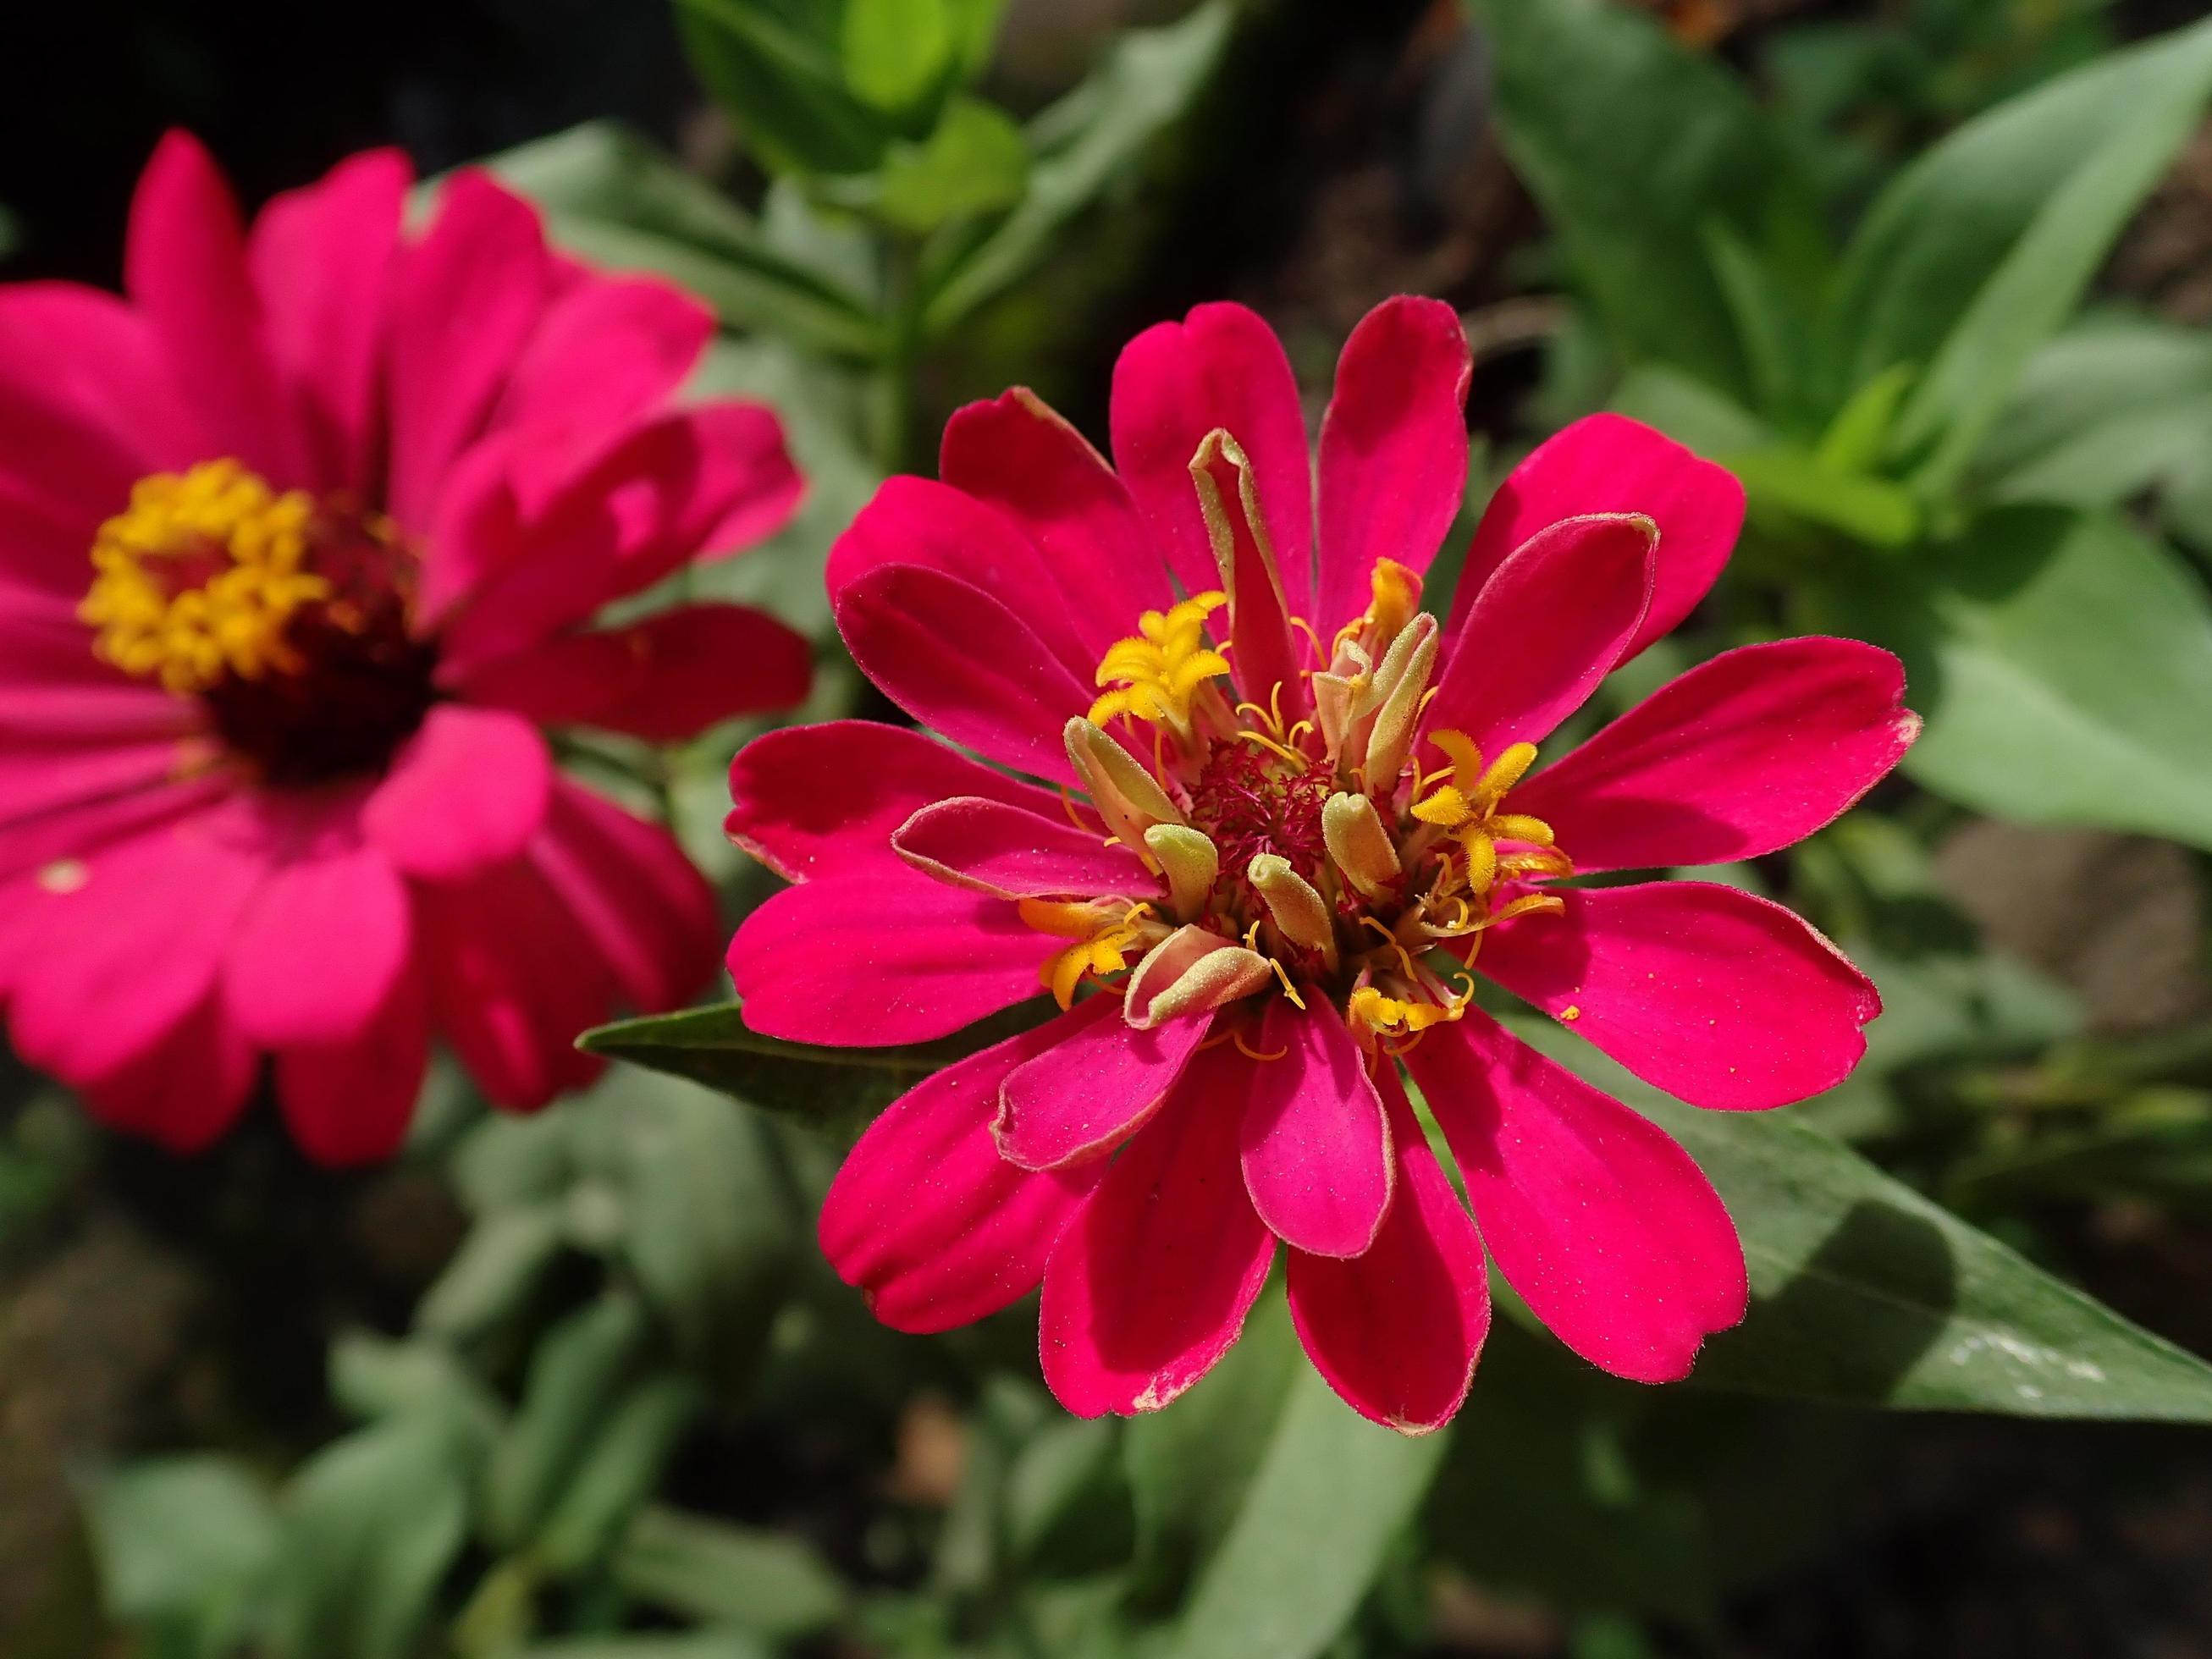 Pink Flower Bloom In The Garden Its Zinnia Elegans Zinnia Violacea Known As Youth And Age Common Zinnia Or Elegant Zinnia Is An Annual Flowering Plant In The Daisy Family Asteraceae Stock Photo At Vecteezy